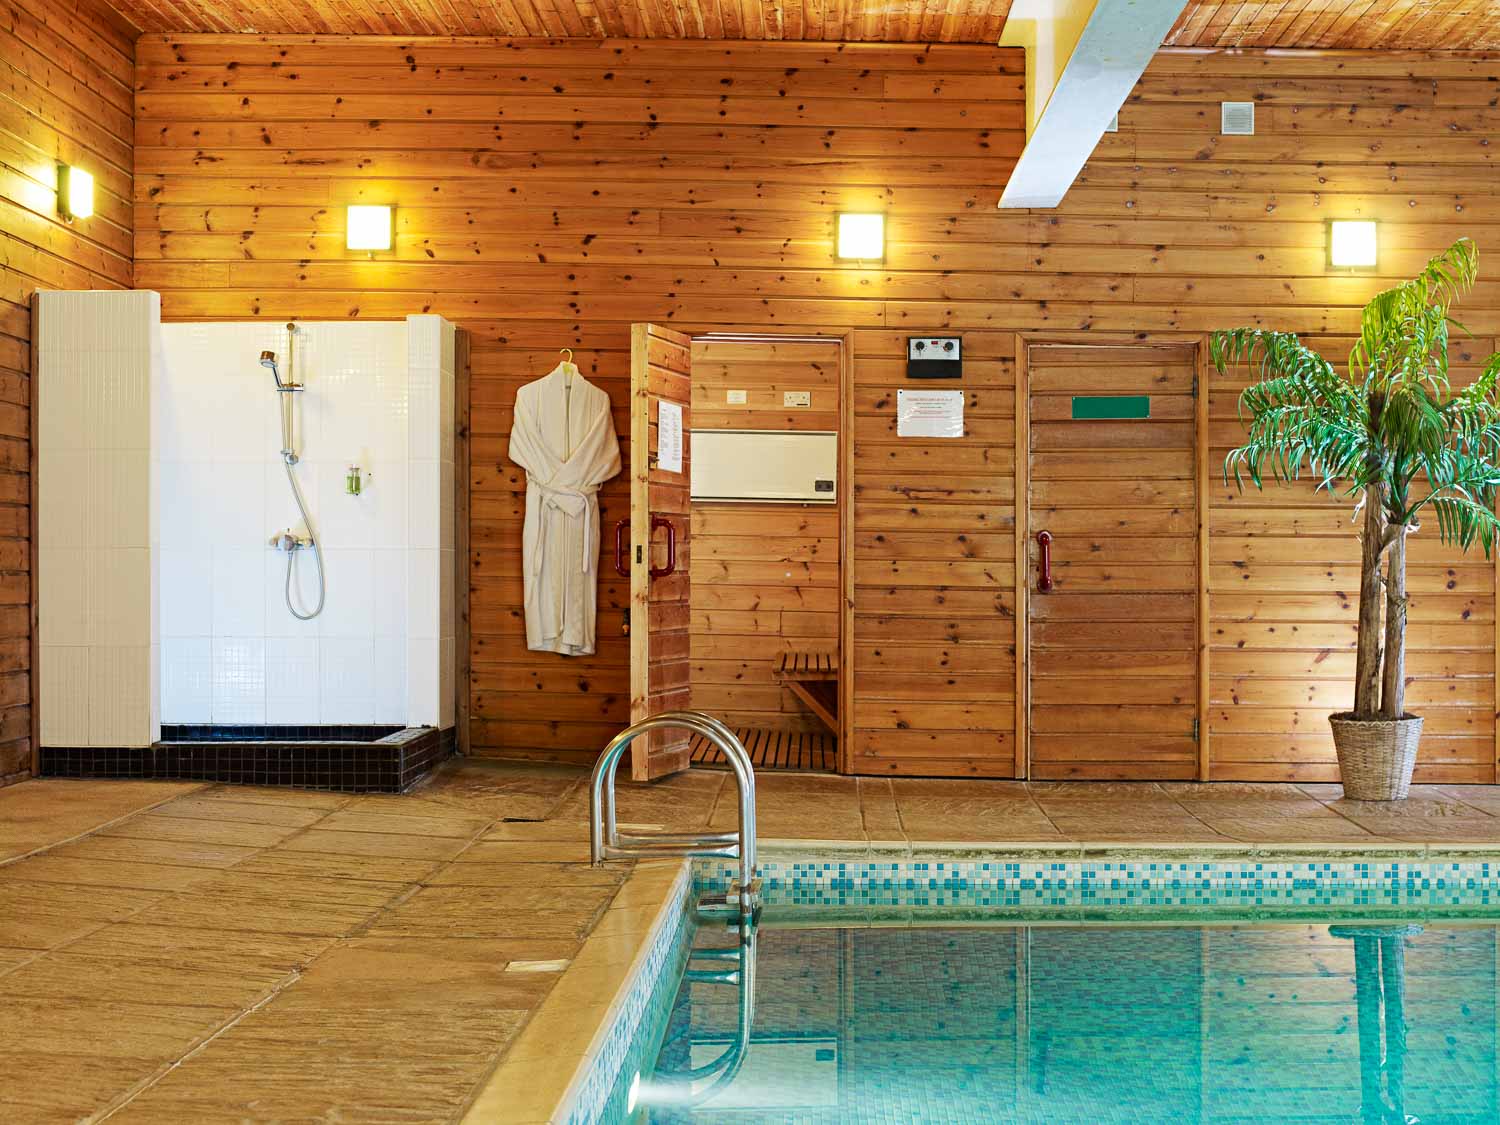 Flear Farm Cottages Indoor Pool, shower and changing room